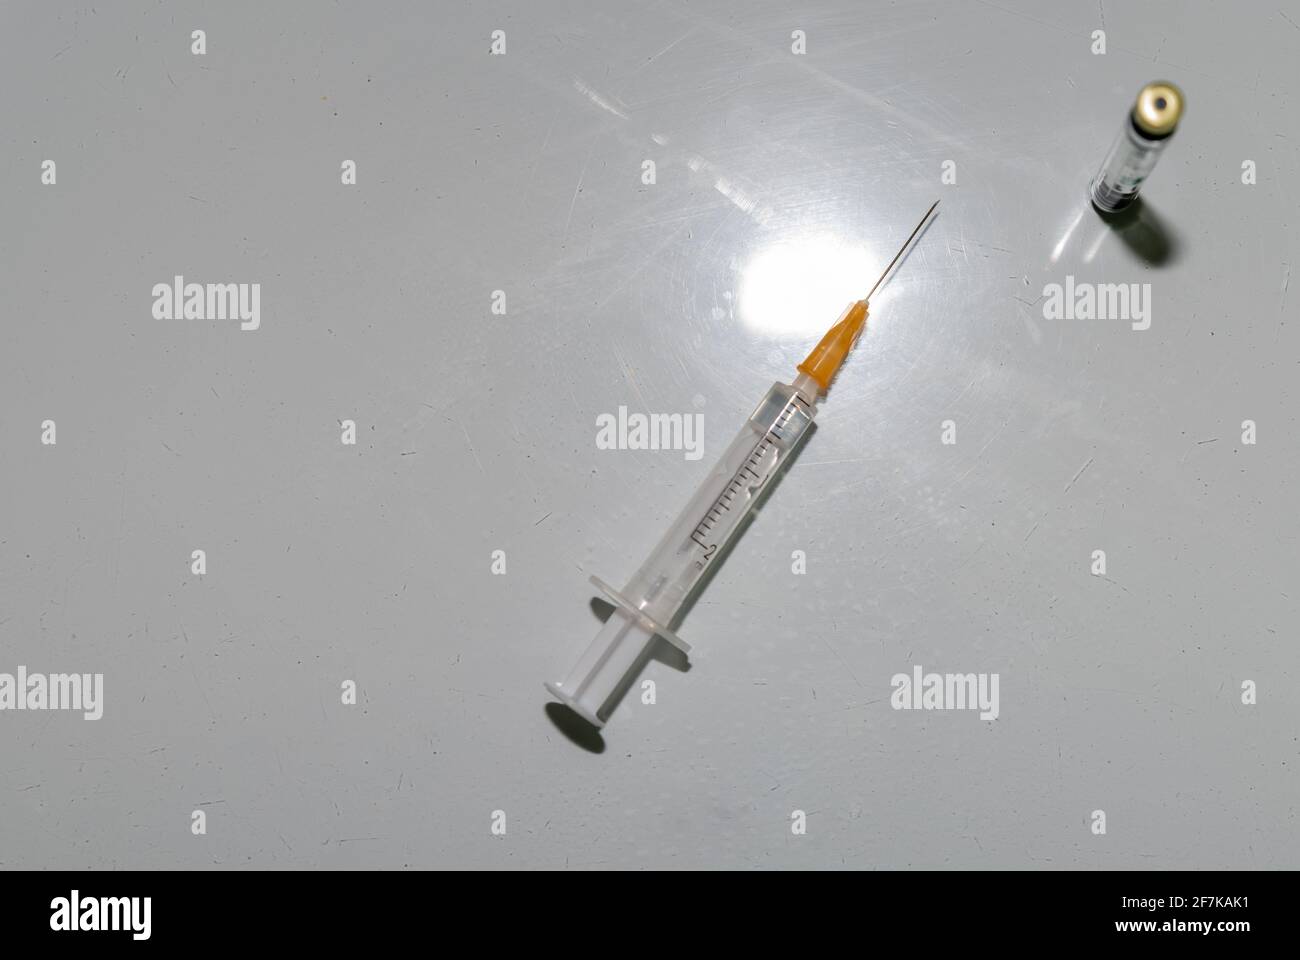 Syringe and needle with a dose of vaccine. Vaccine can against Corona, close-up on a white table. Stock Photo